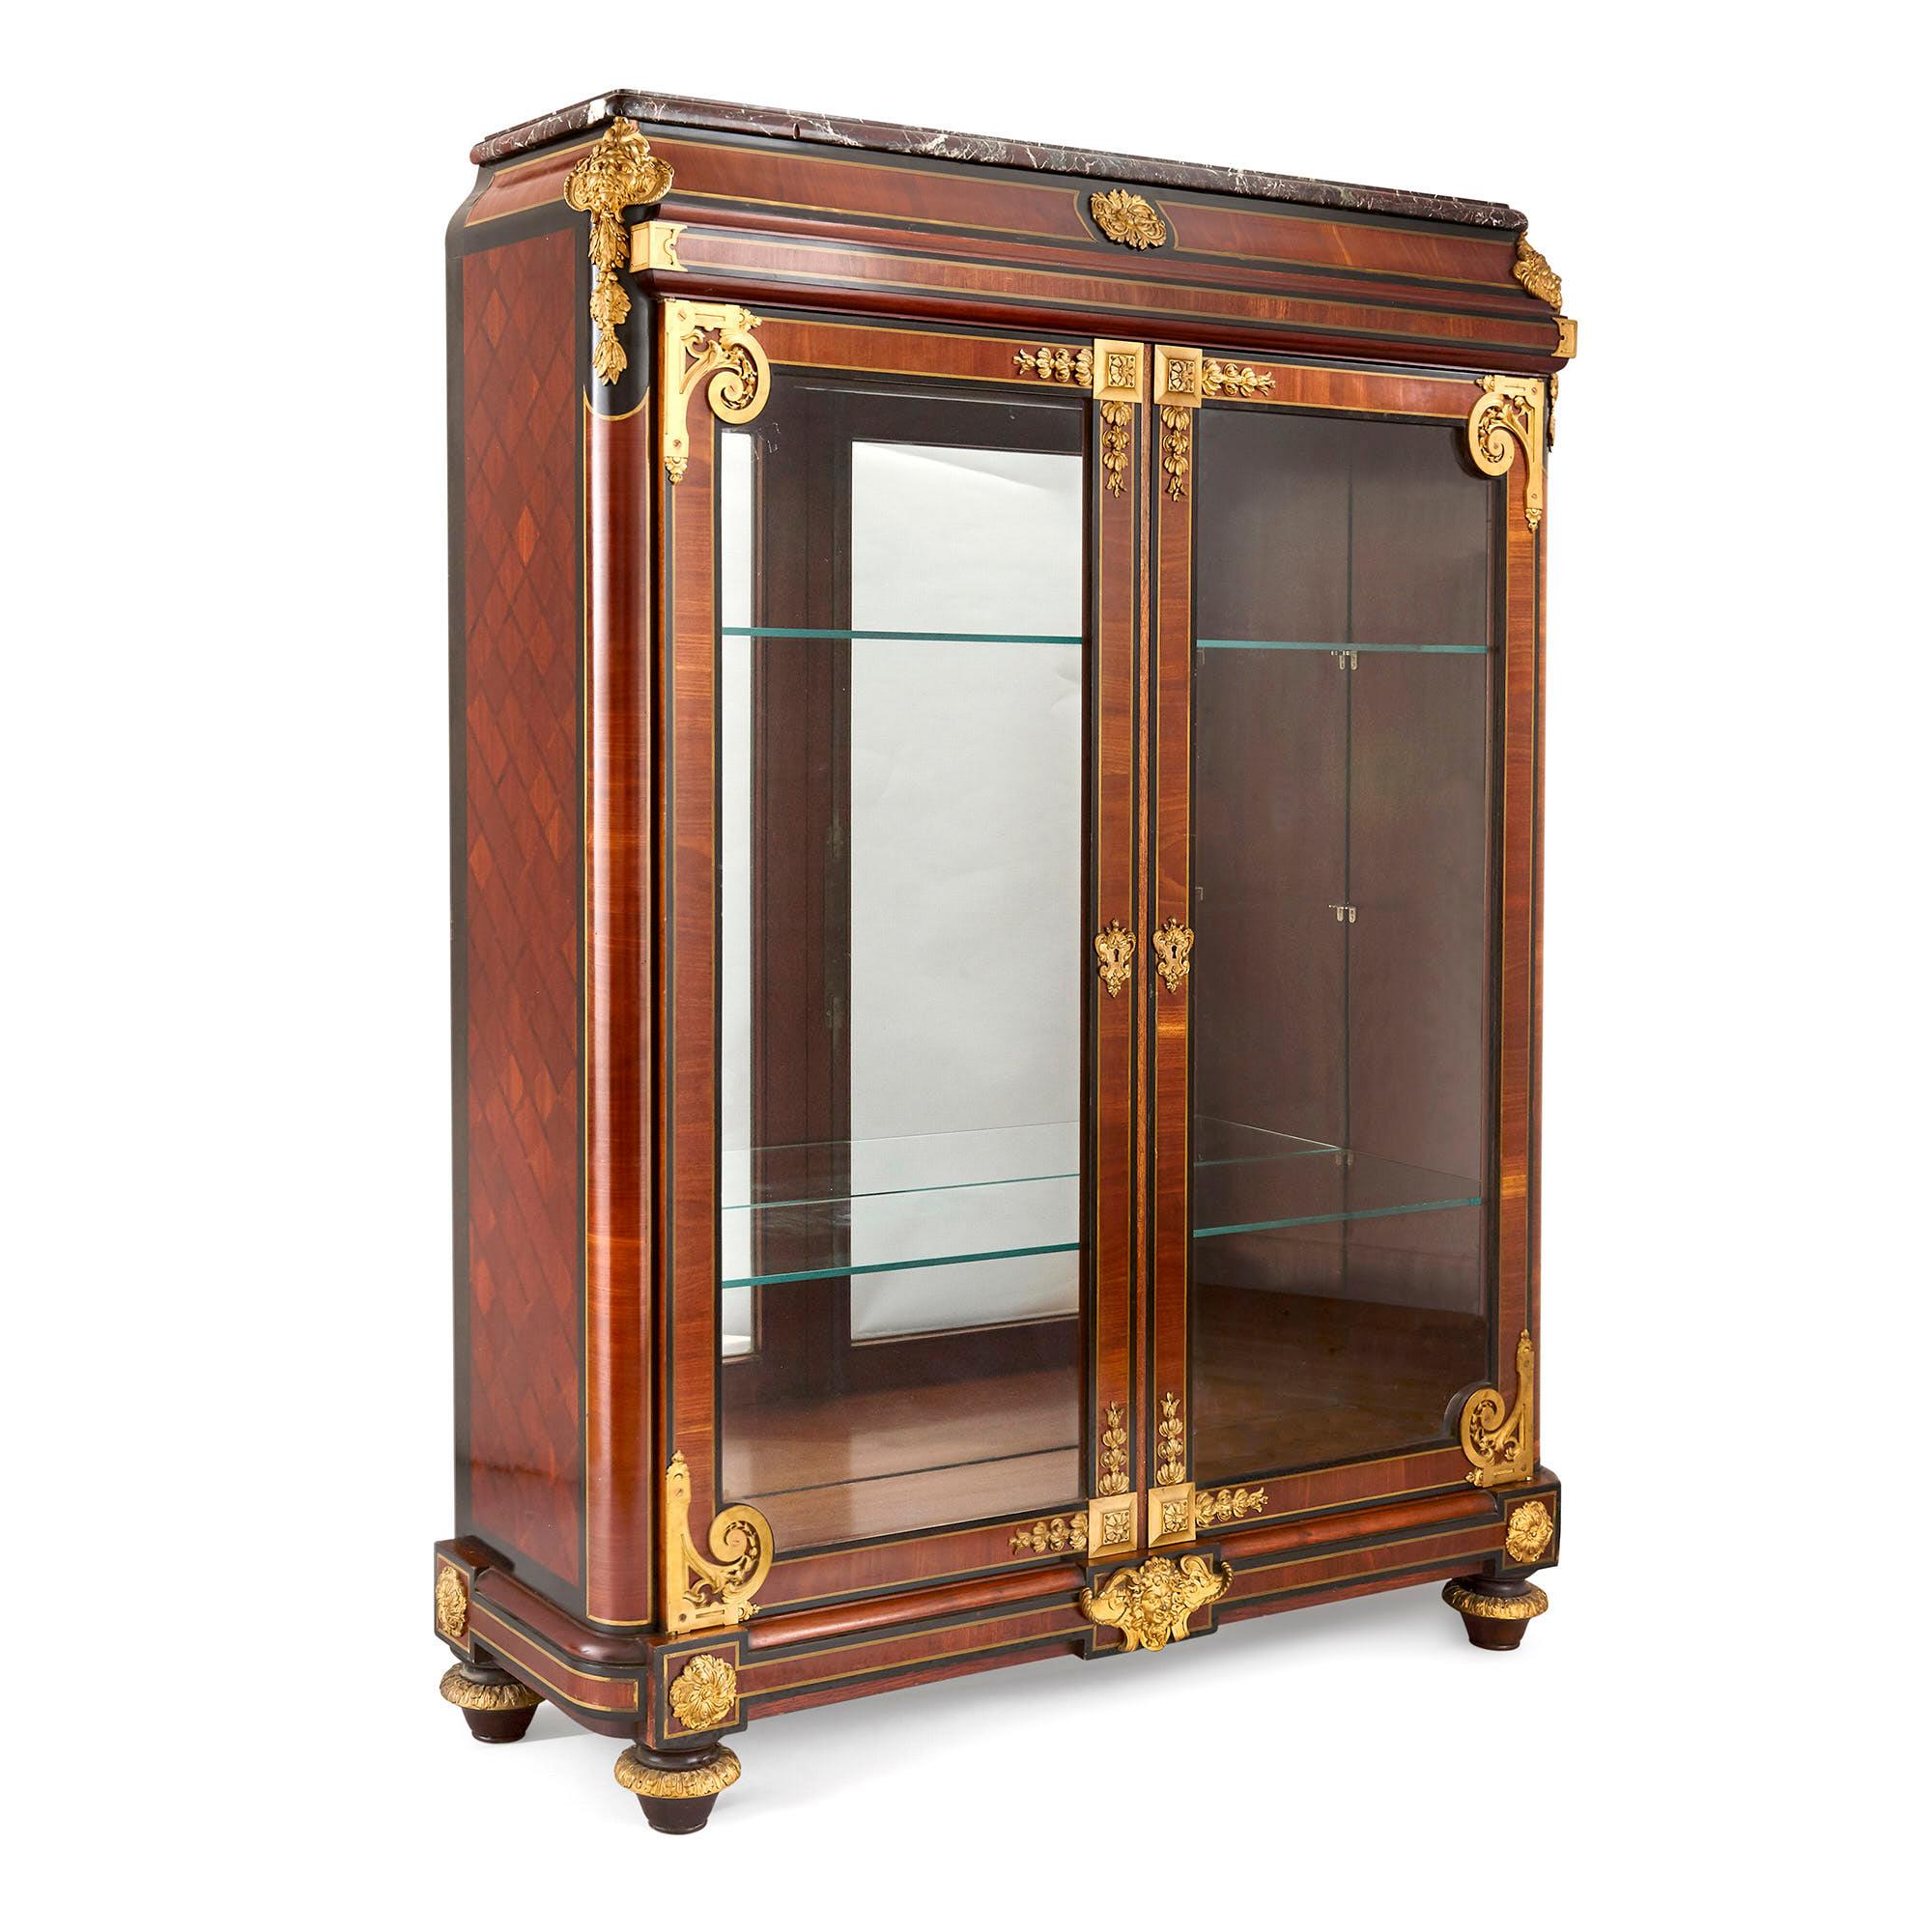 French neoclassical style gilt bronze mounted ebonized wood display cabinet
French, late 19th century
Measures: Height 164cm, width 122cm, depth 40cm

This fine display cabinet, attributed to Mercier Frères, is a superb example of the French